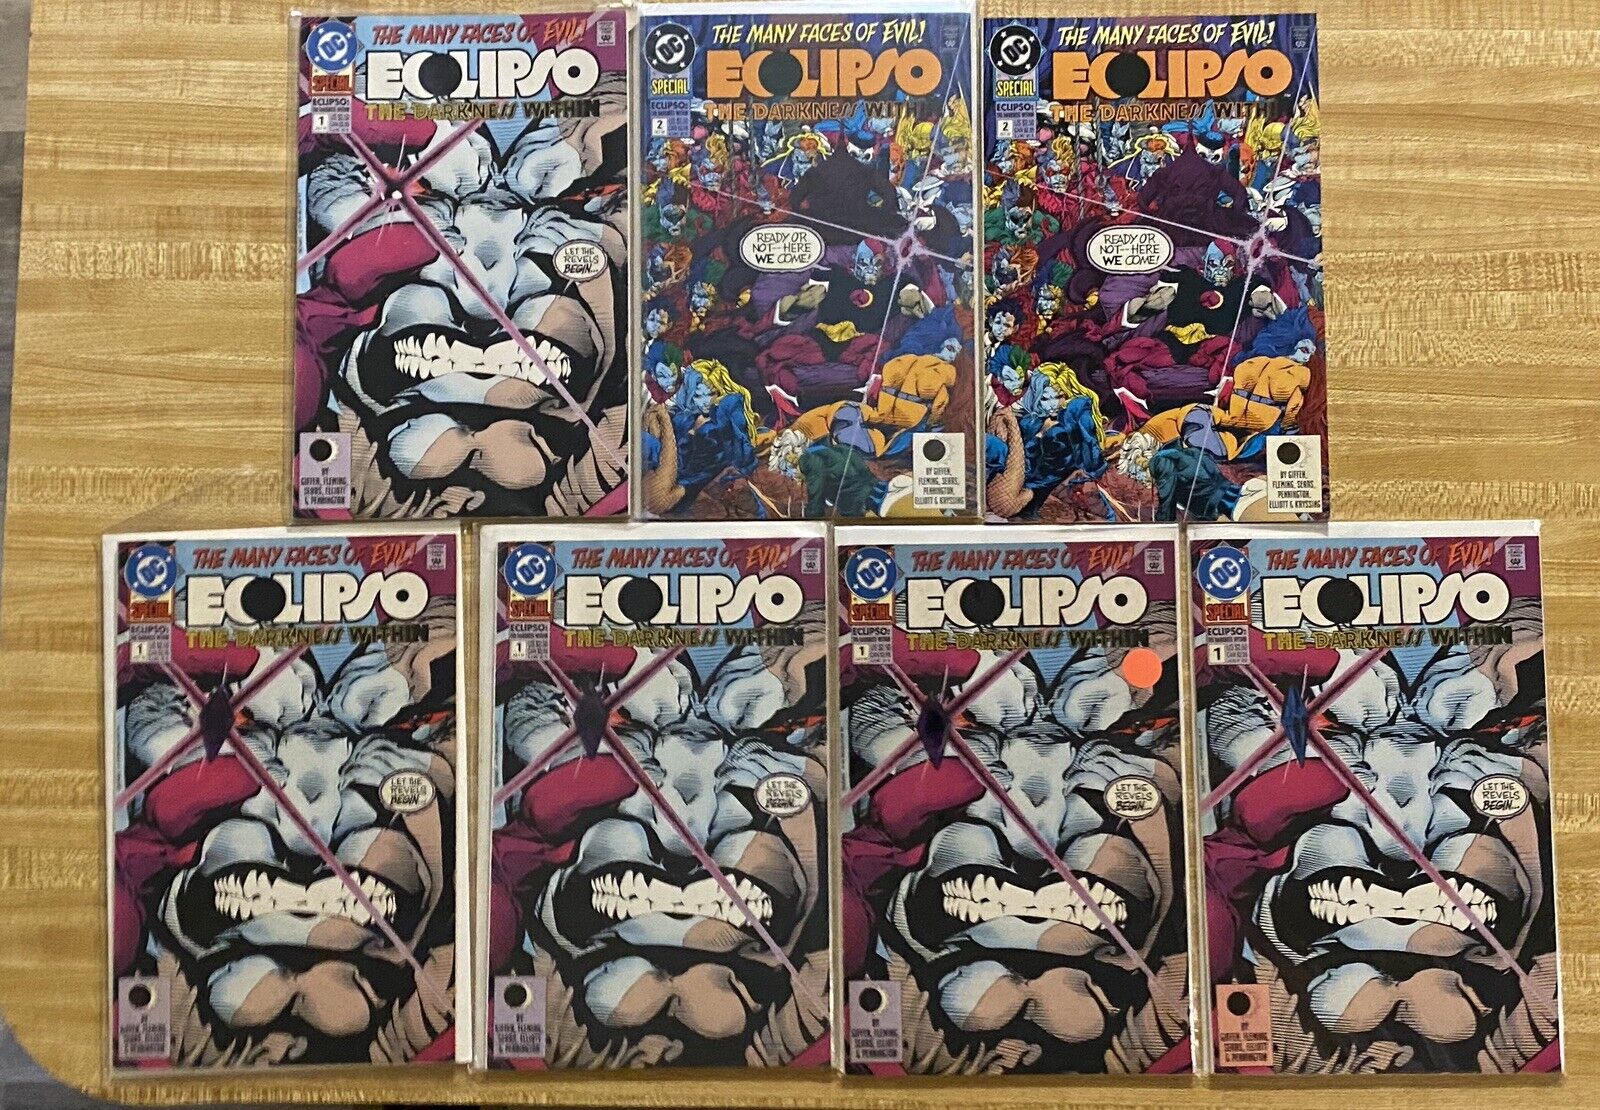 ECLIPSO #1 TO #10 1992 AND DARKNESS WITHIN #1 AND #2 - DC - 29 COMICS Без бренда - фотография #2